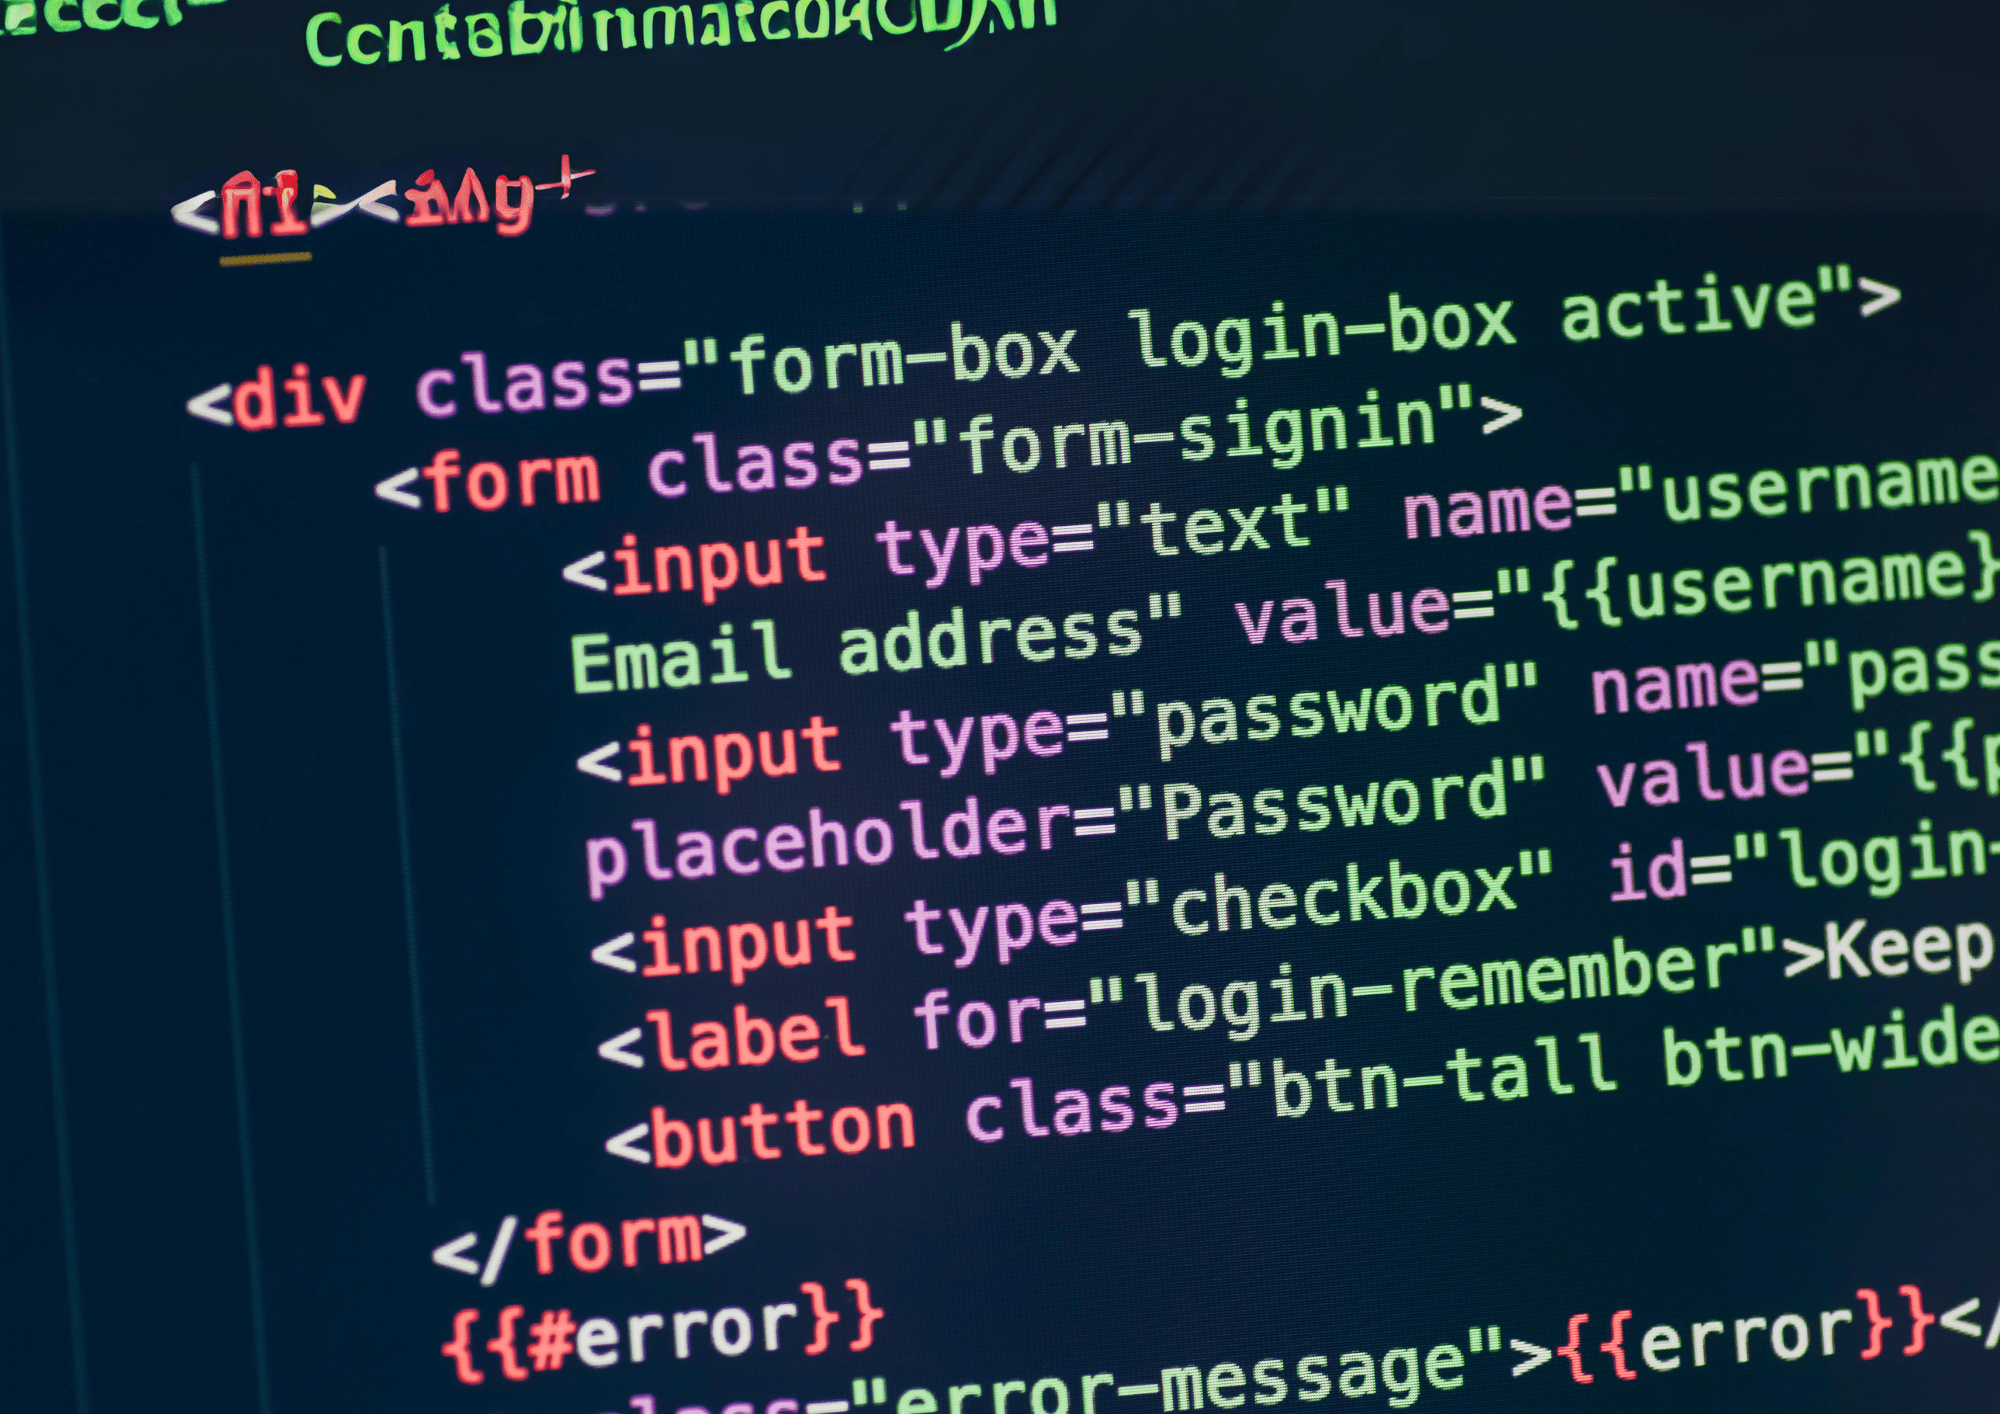 A close-up view of a computer screen displaying HTML code for a login form, including fields for email address and password, with syntax highlighting.